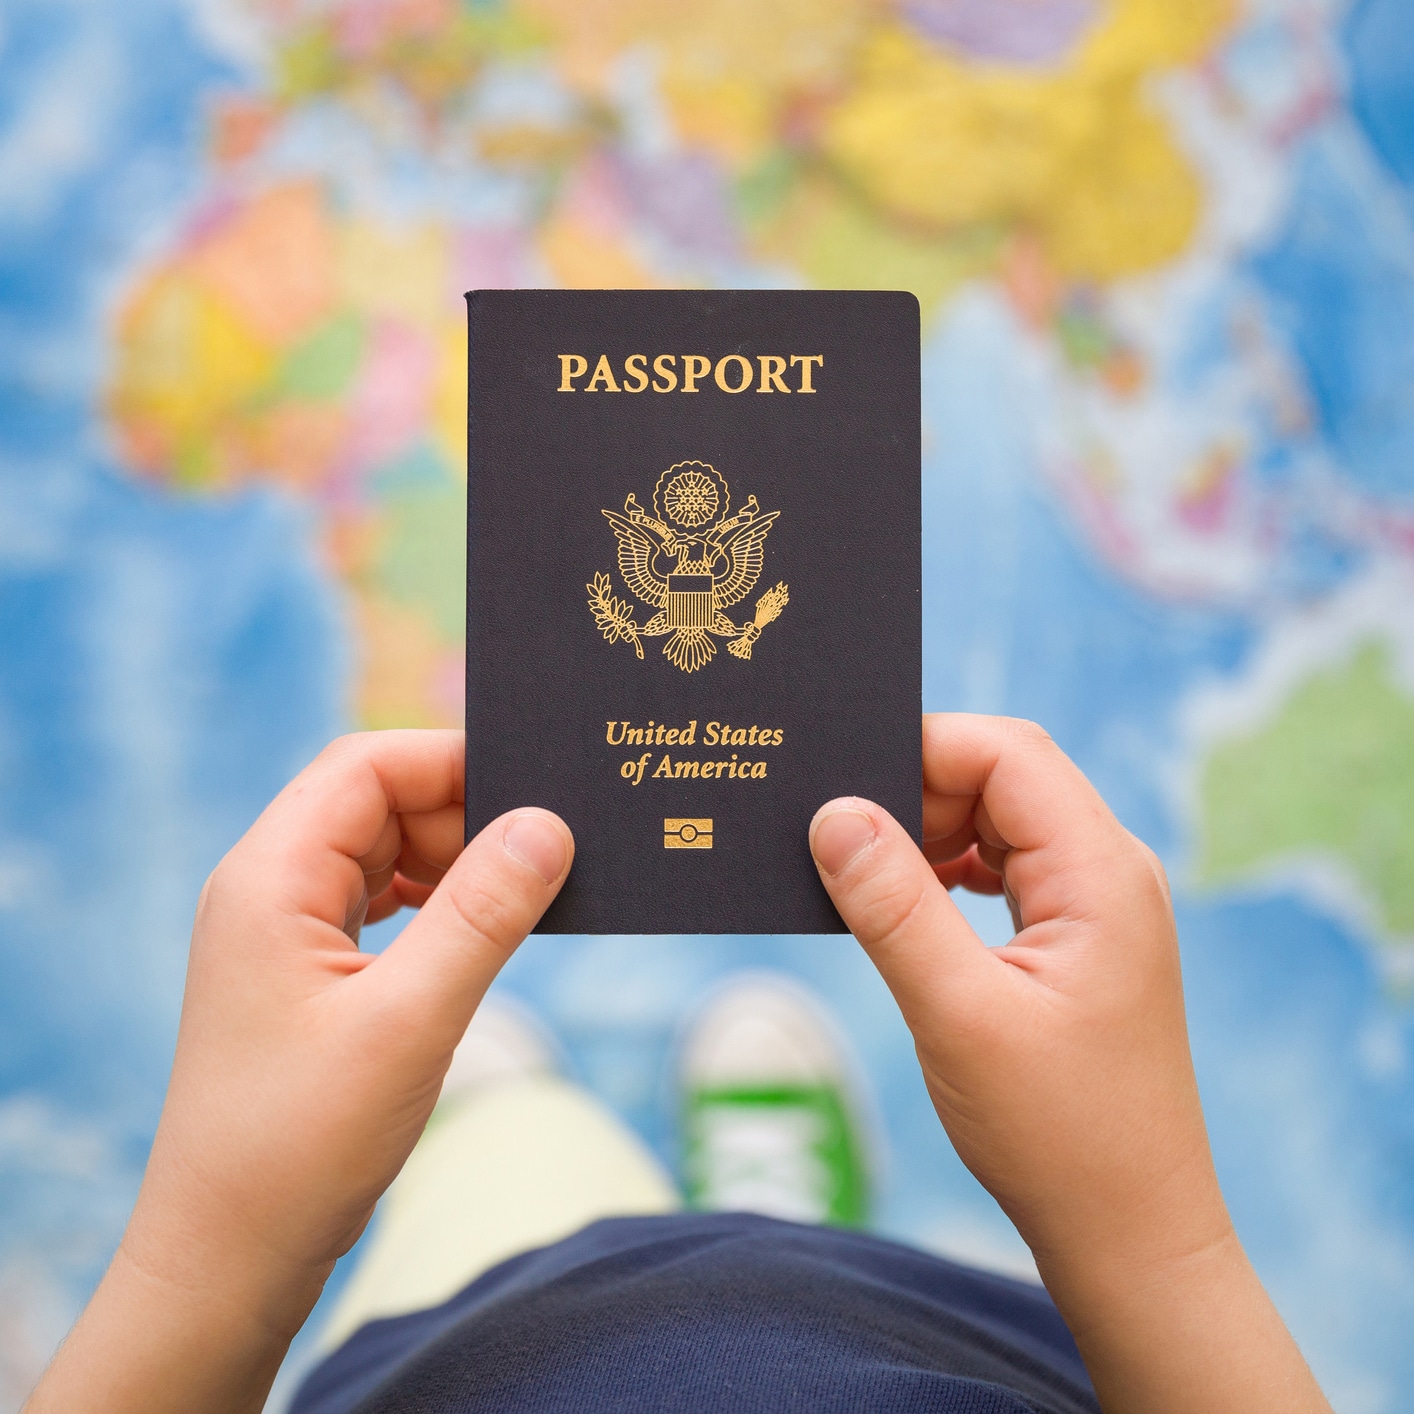 Child's hand holding US passport. Map background. Ready for traveling. Open world.